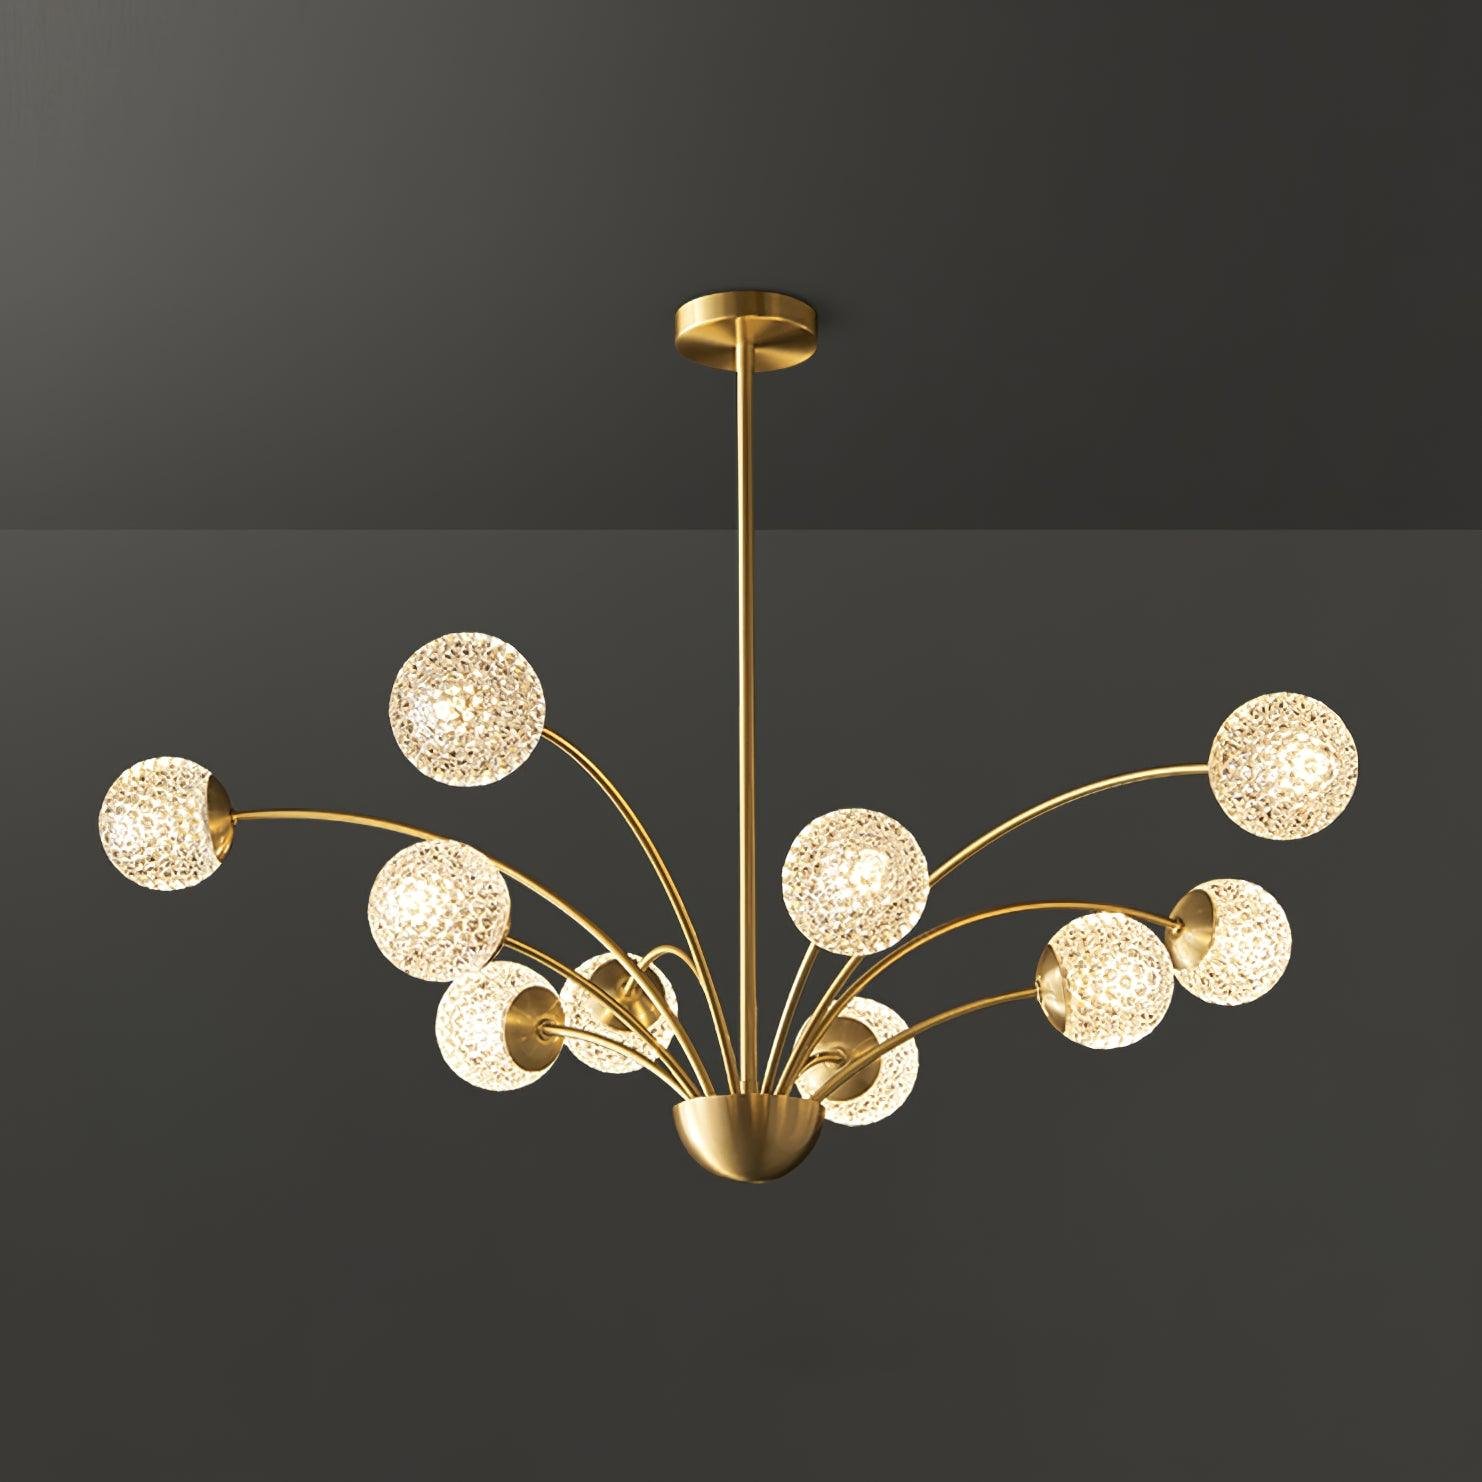 Chandelier Millender with 10 Heads, Diameter 37.4 inches x Height 10.2 inches (95cm x 26cm), made of Brass and Opaque materials